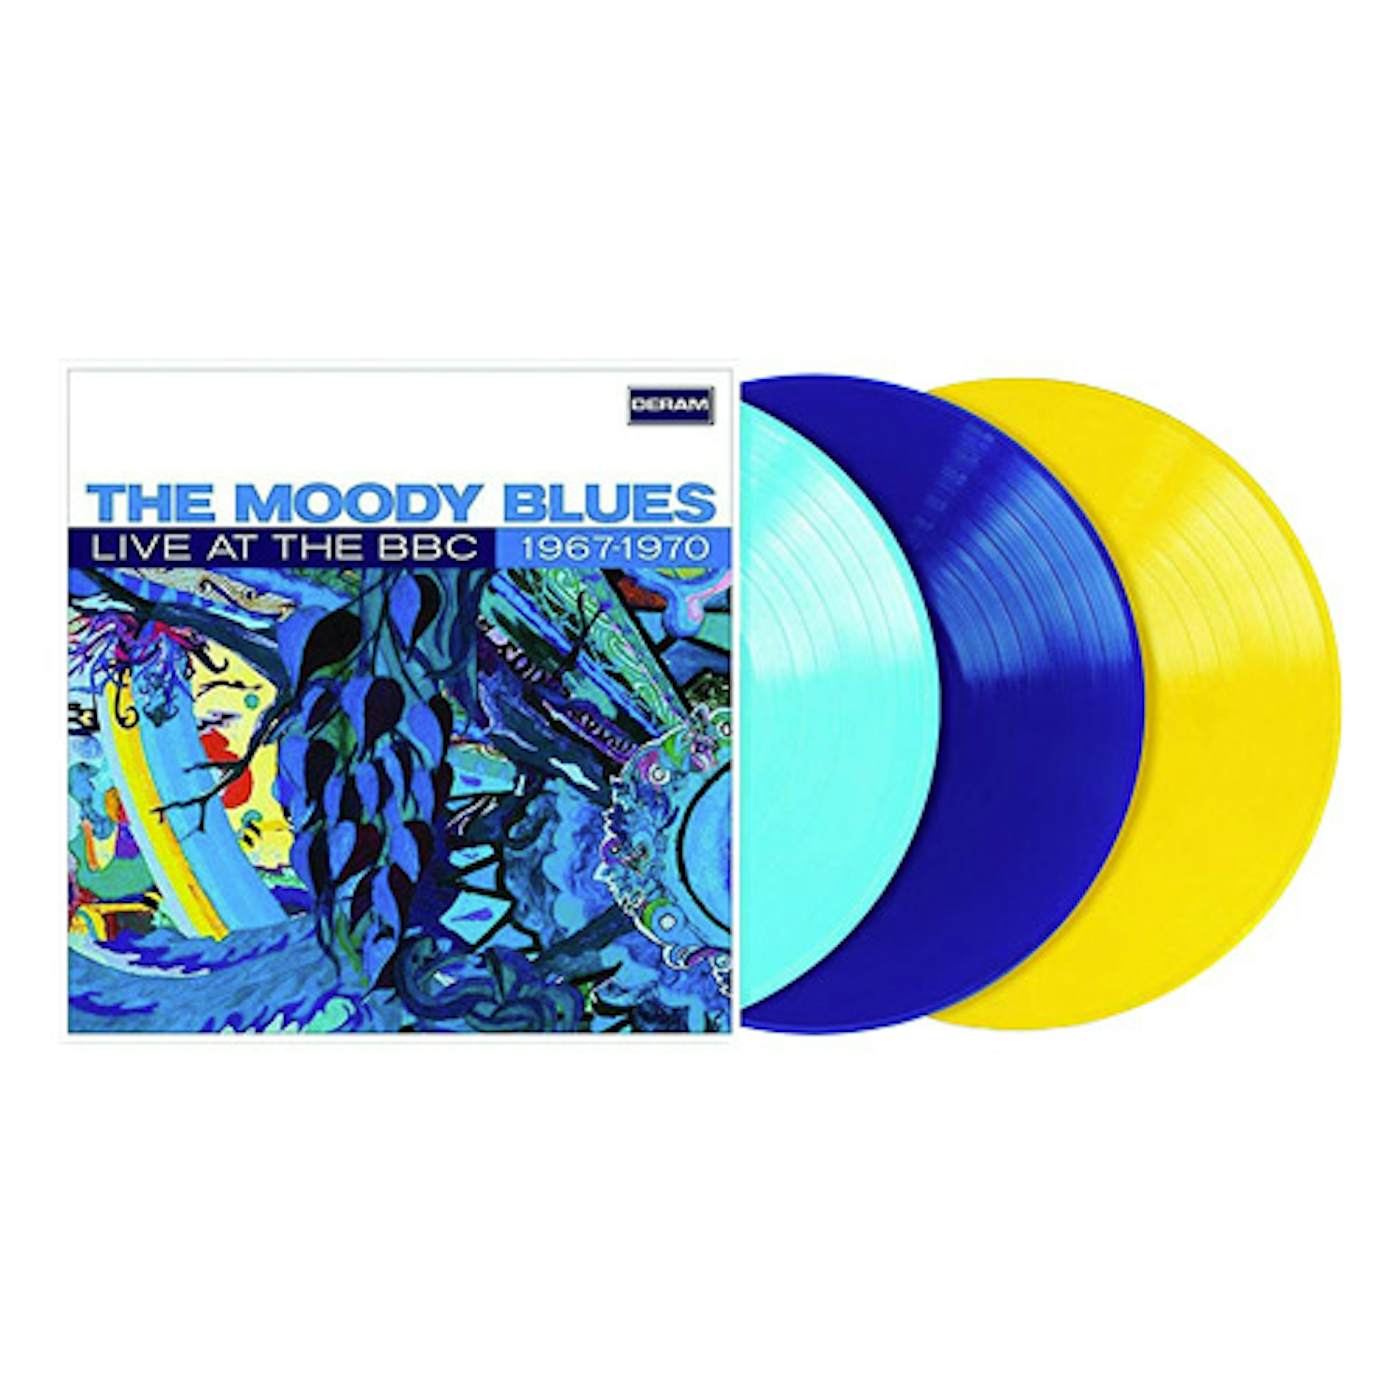 The Moody Blues LIVE AT THE BBC 1967-1970 Vinyl Record